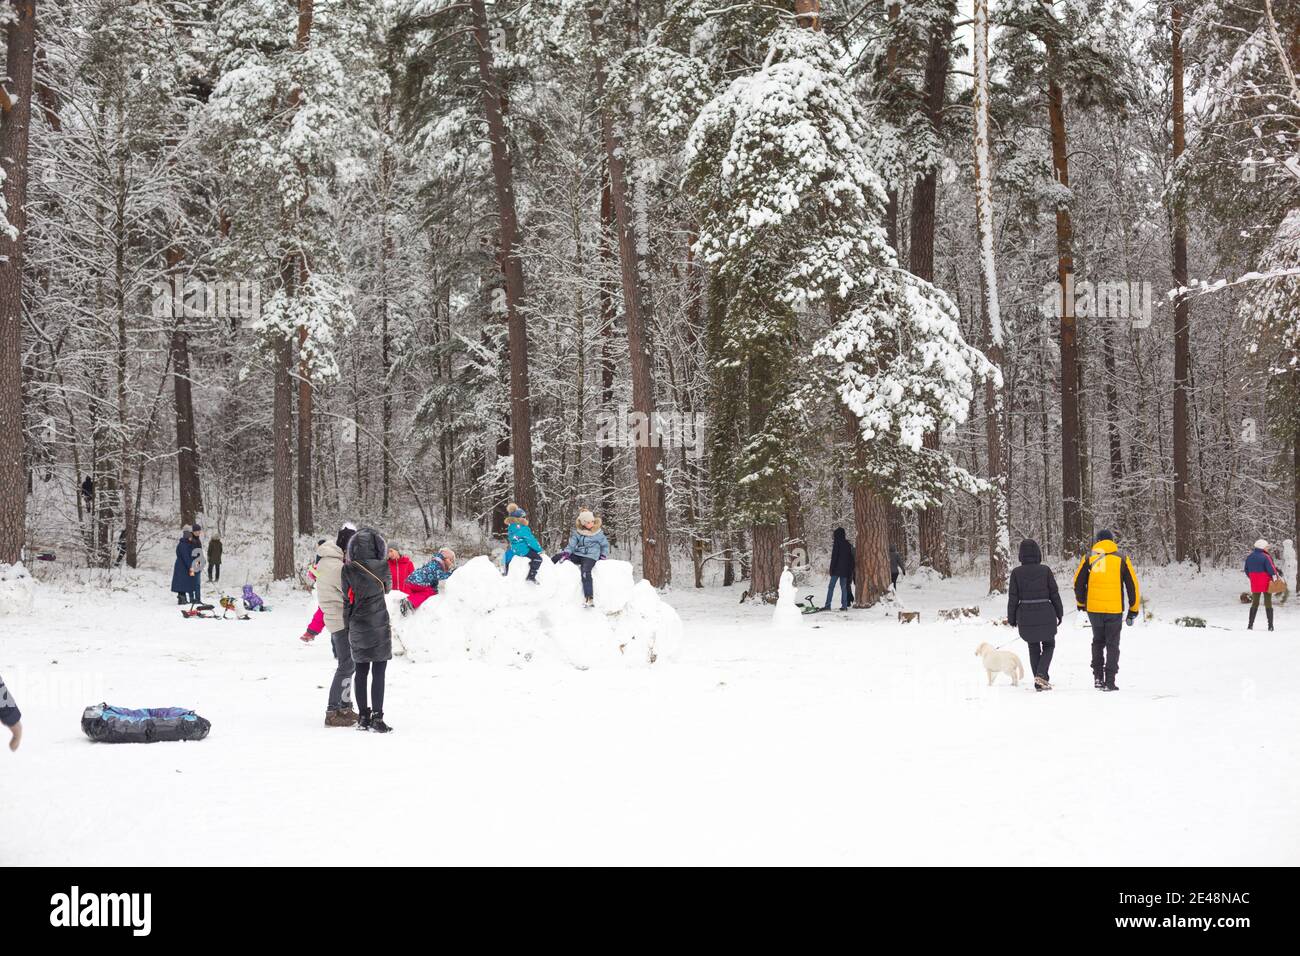 People walk in snowy winter forest with their families, with skis, sleds, inflatable tubing, roll down hill, build fortress and a snowman. Winter outd Stock Photo